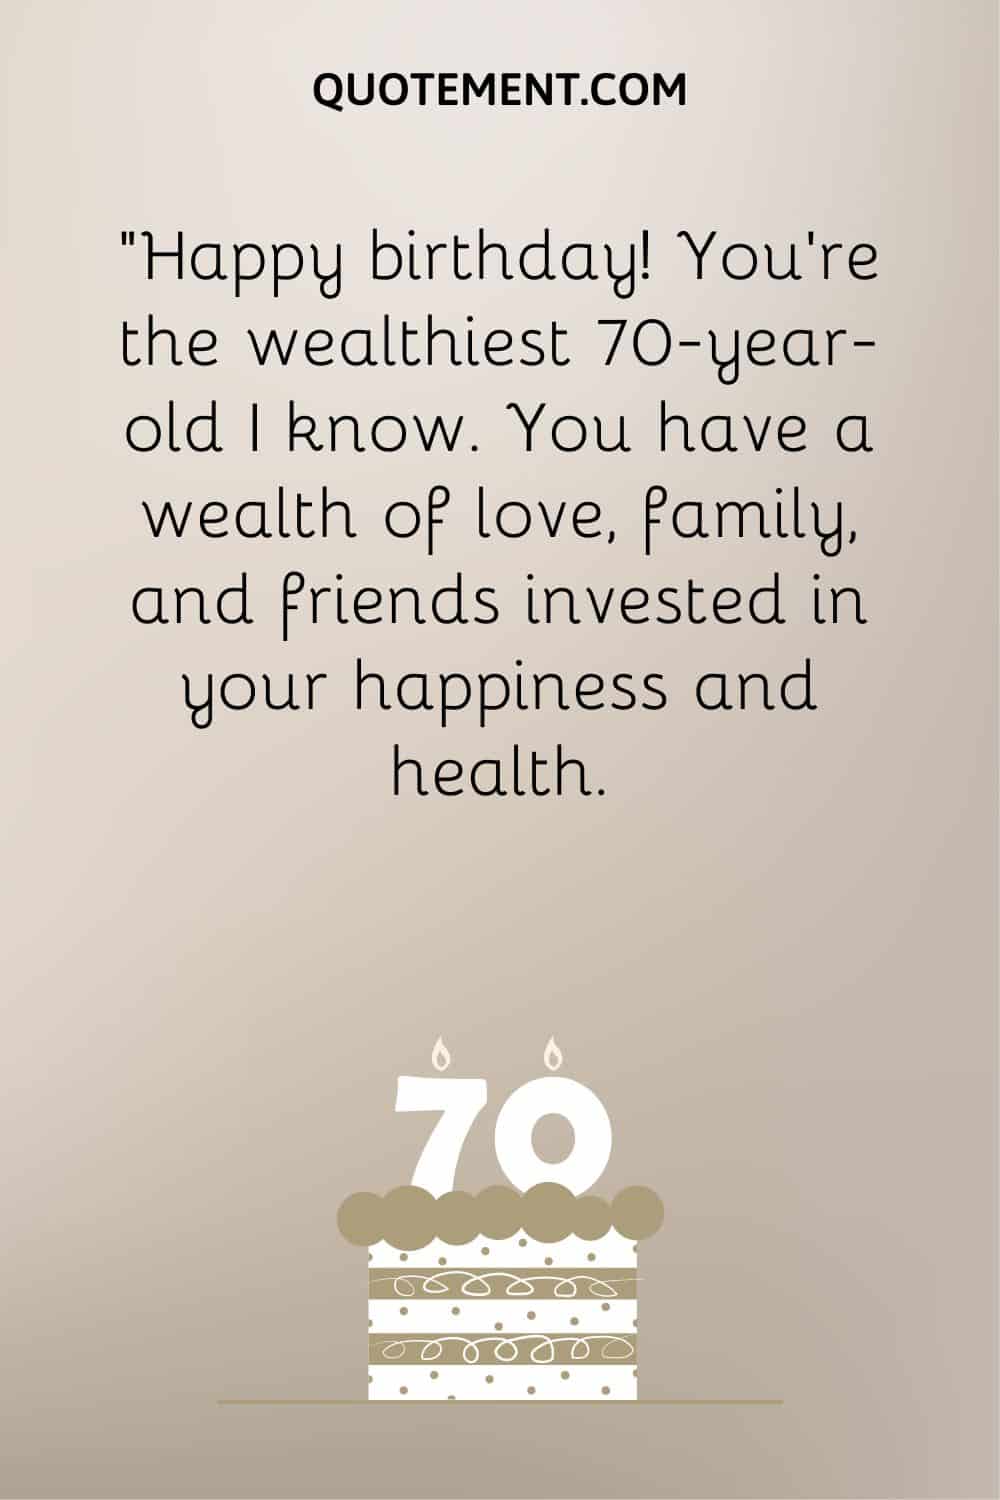 “Happy birthday! You're the wealthiest 70-year-old I know. You have a wealth of love, family, and friends invested in your happiness and health.